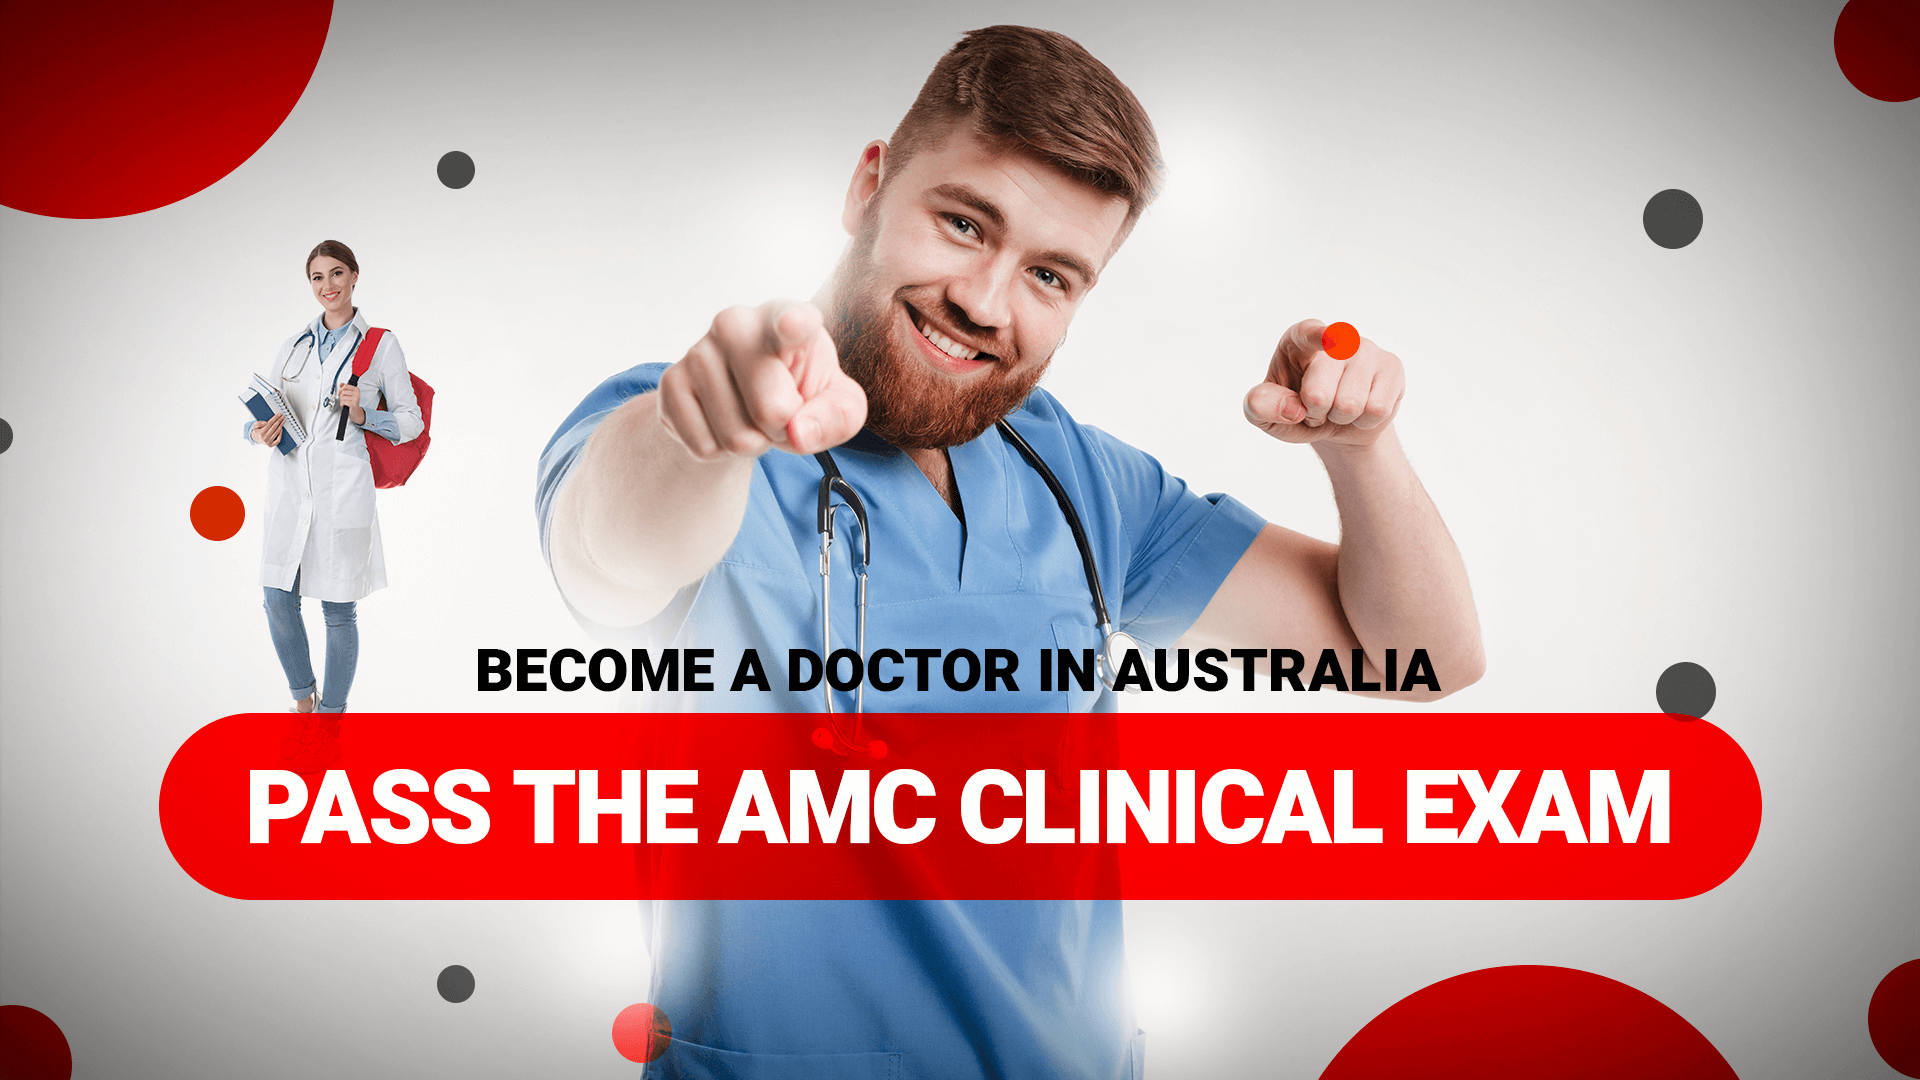 BECOMING A DOCTOR IN AUSTRALIA: HOW TO PASS THE AMC CLINICAL EXAM